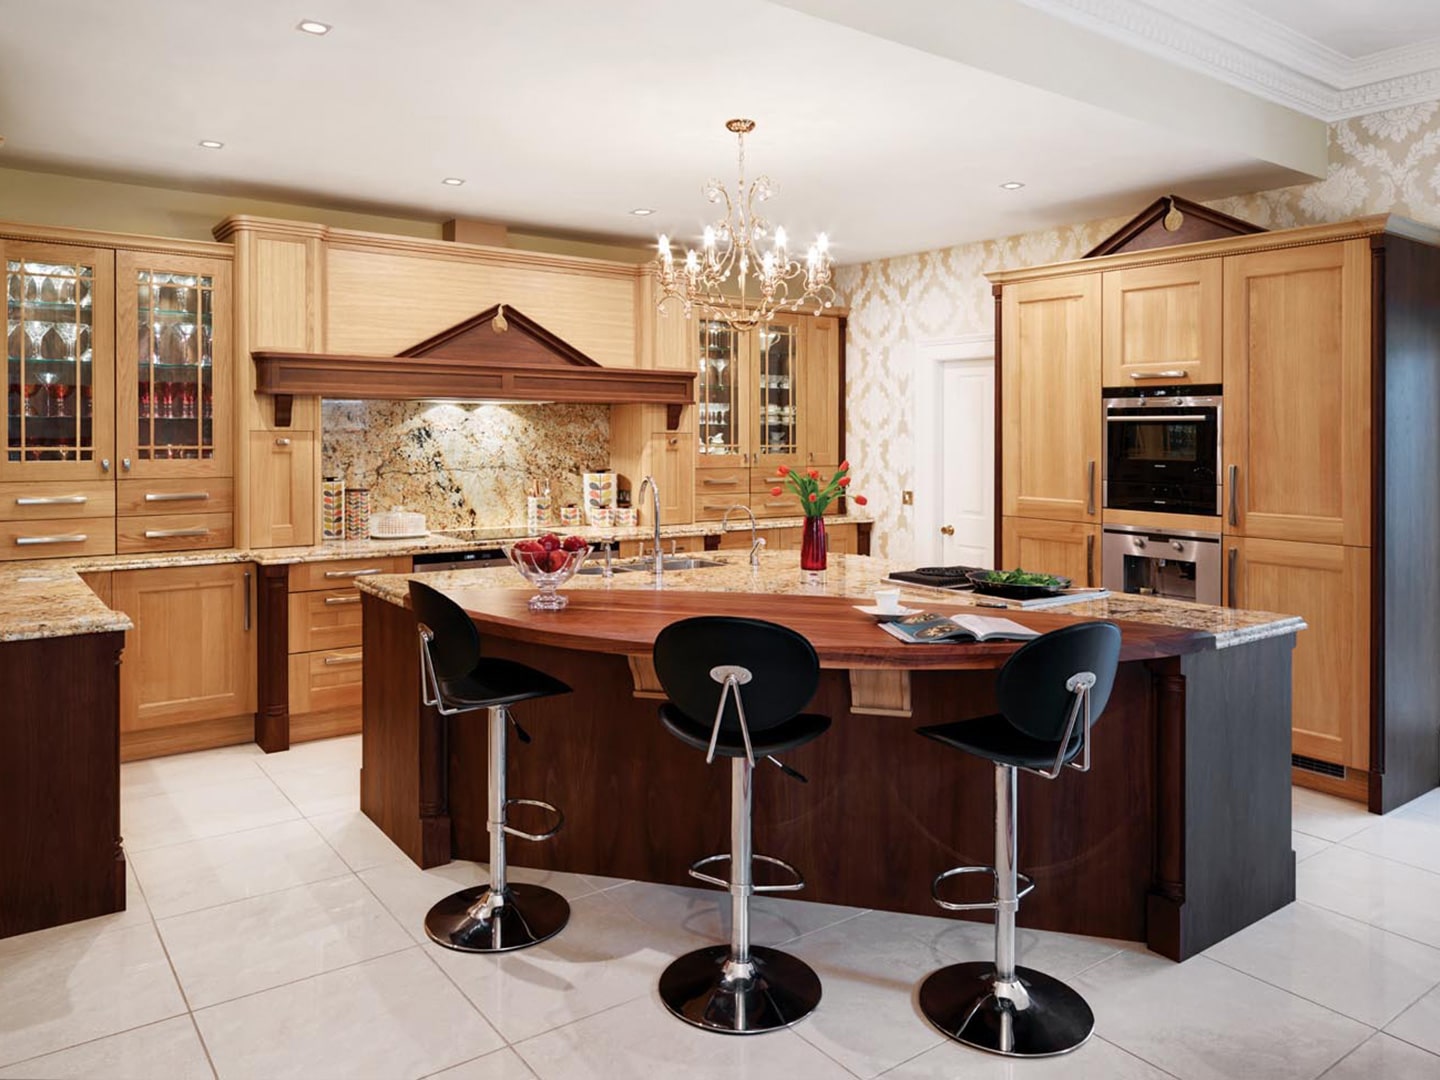 Light brown wooden finish Callerton kitchen with breakfast bar and bar stools